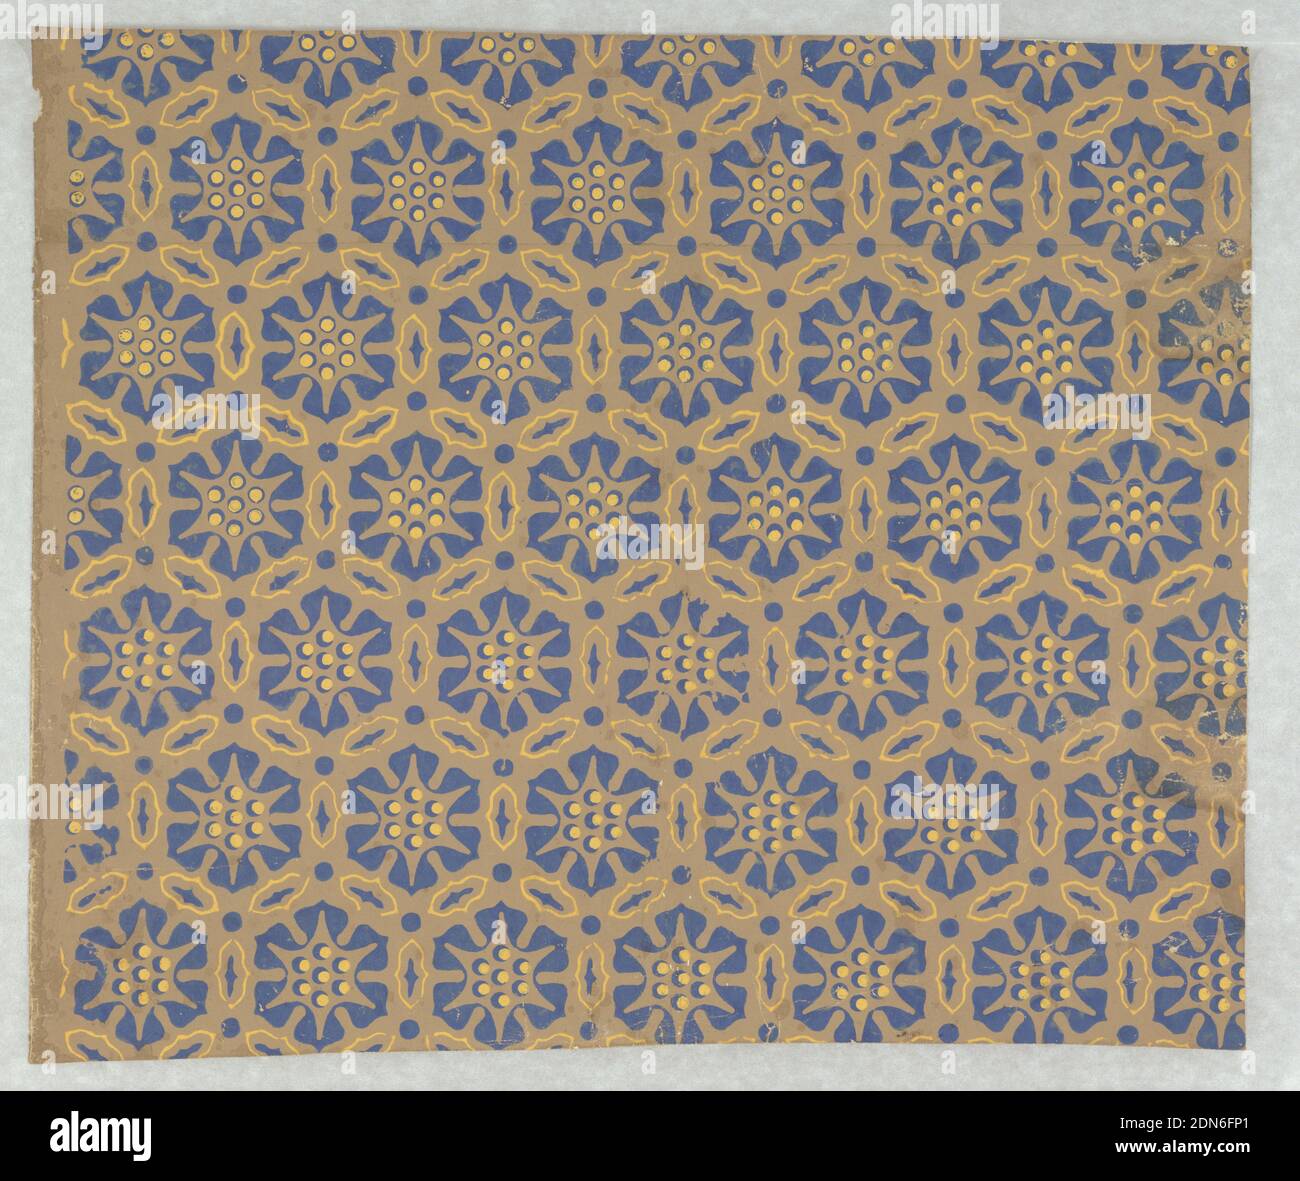 Sidewall, Block-printed on joined sheets, All-over pattern of stylized hexagonal rosettes separated by stylized leaves and dots in a continuous hexagonal design. Blue and yellow on brown., France, 1800, Wallcoverings, Sidewall Stock Photo